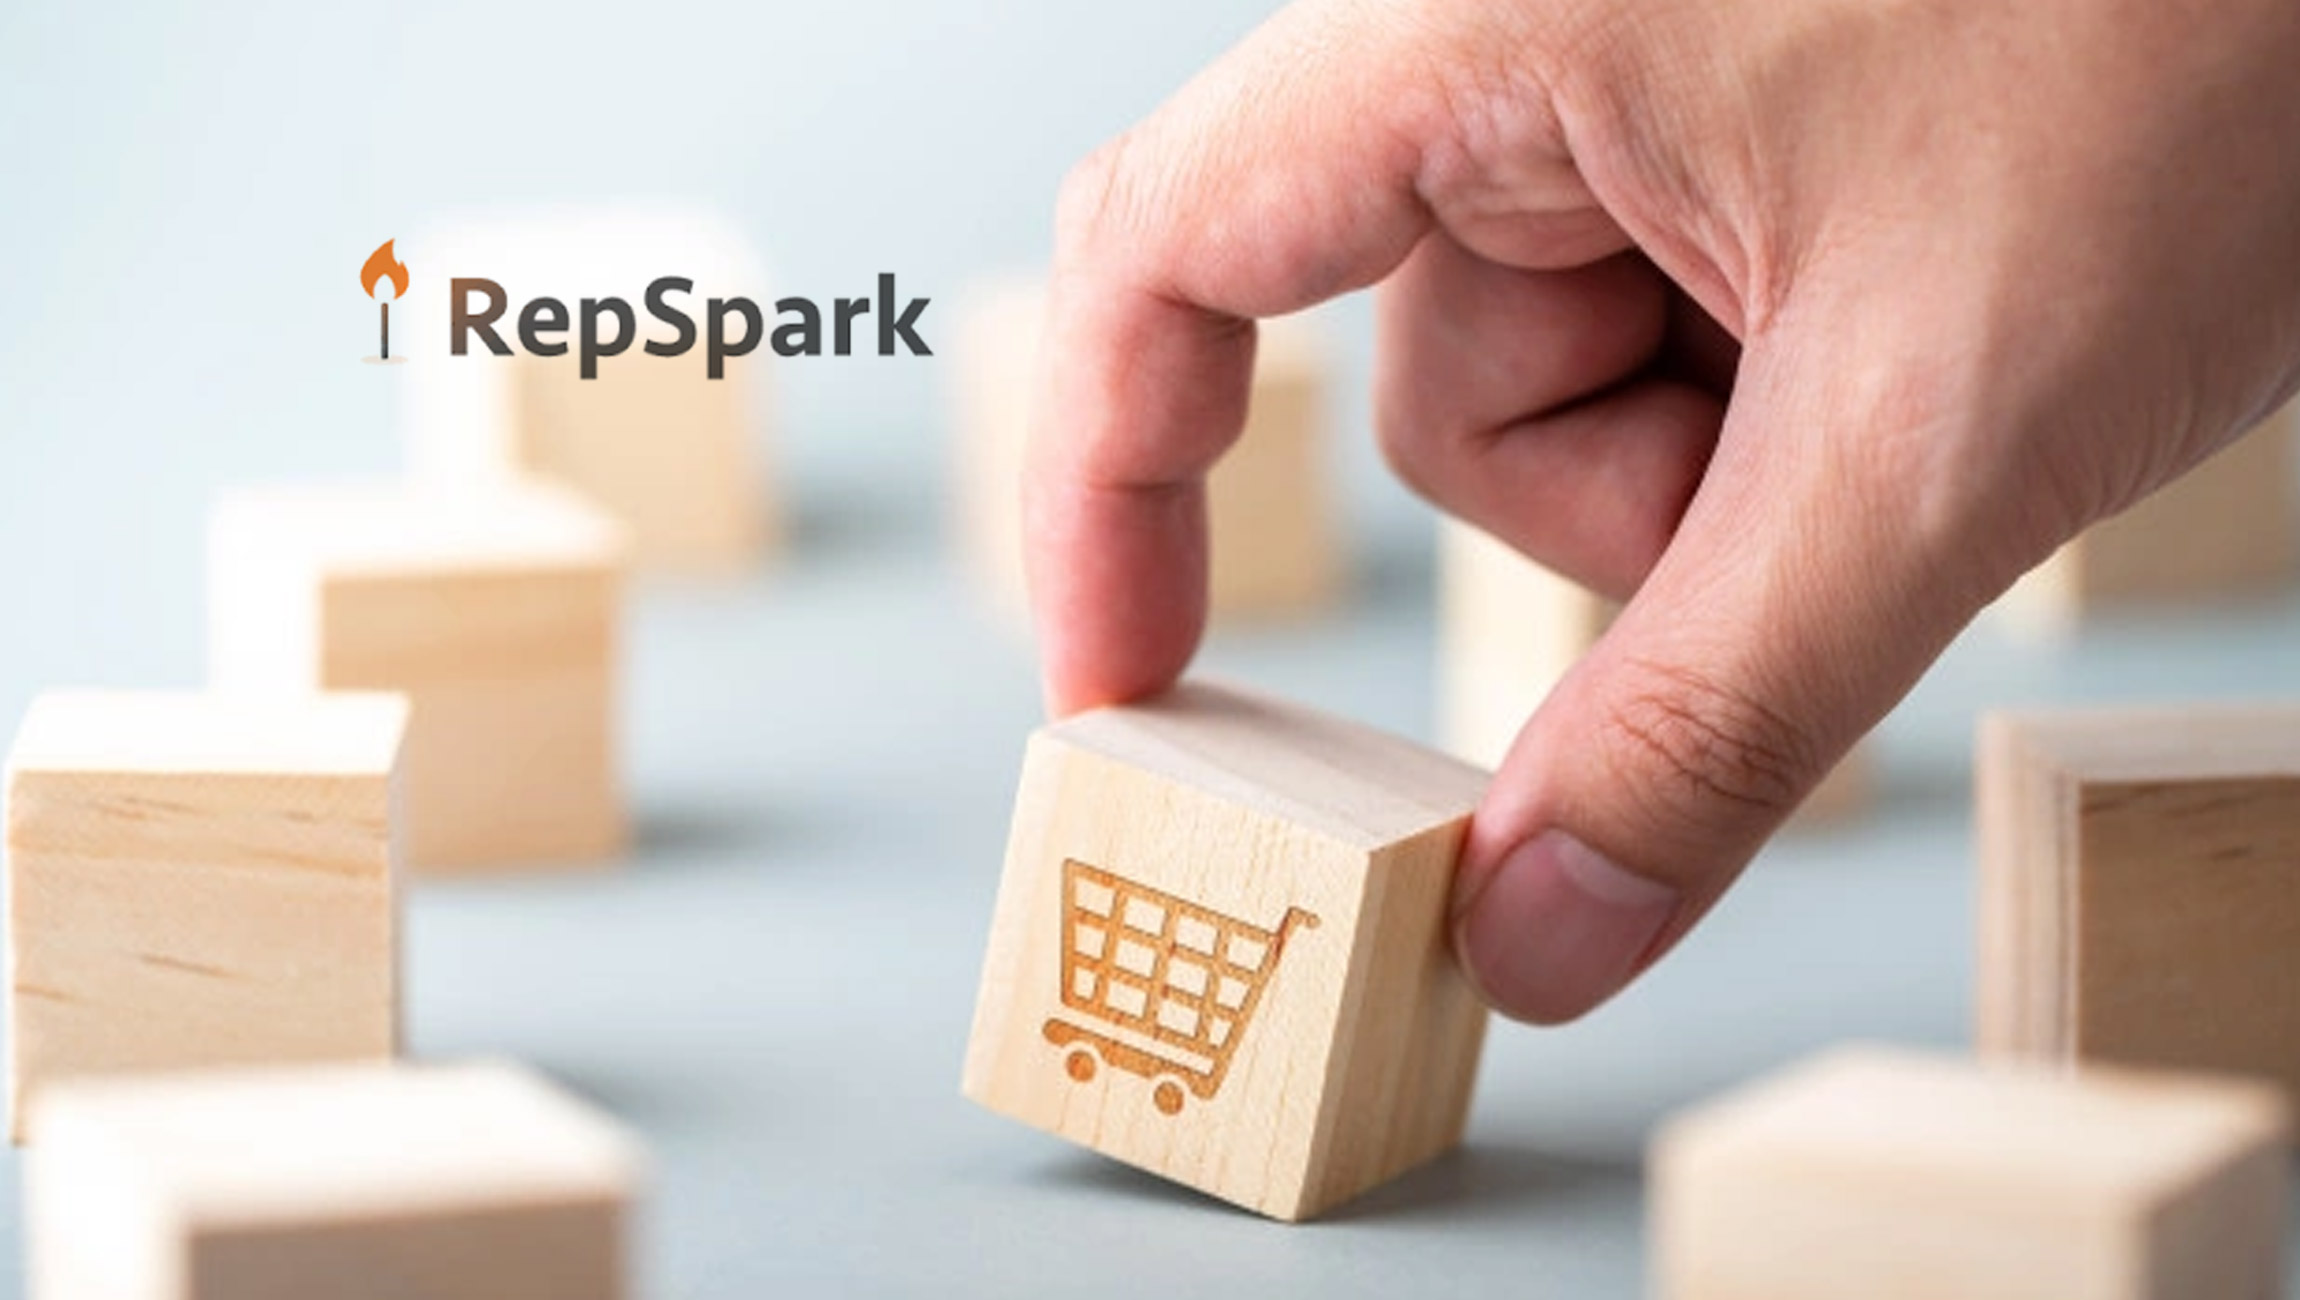 RepSpark's Leading B2B eCommerce Platform Launches Community Connecting Brands and Retailers